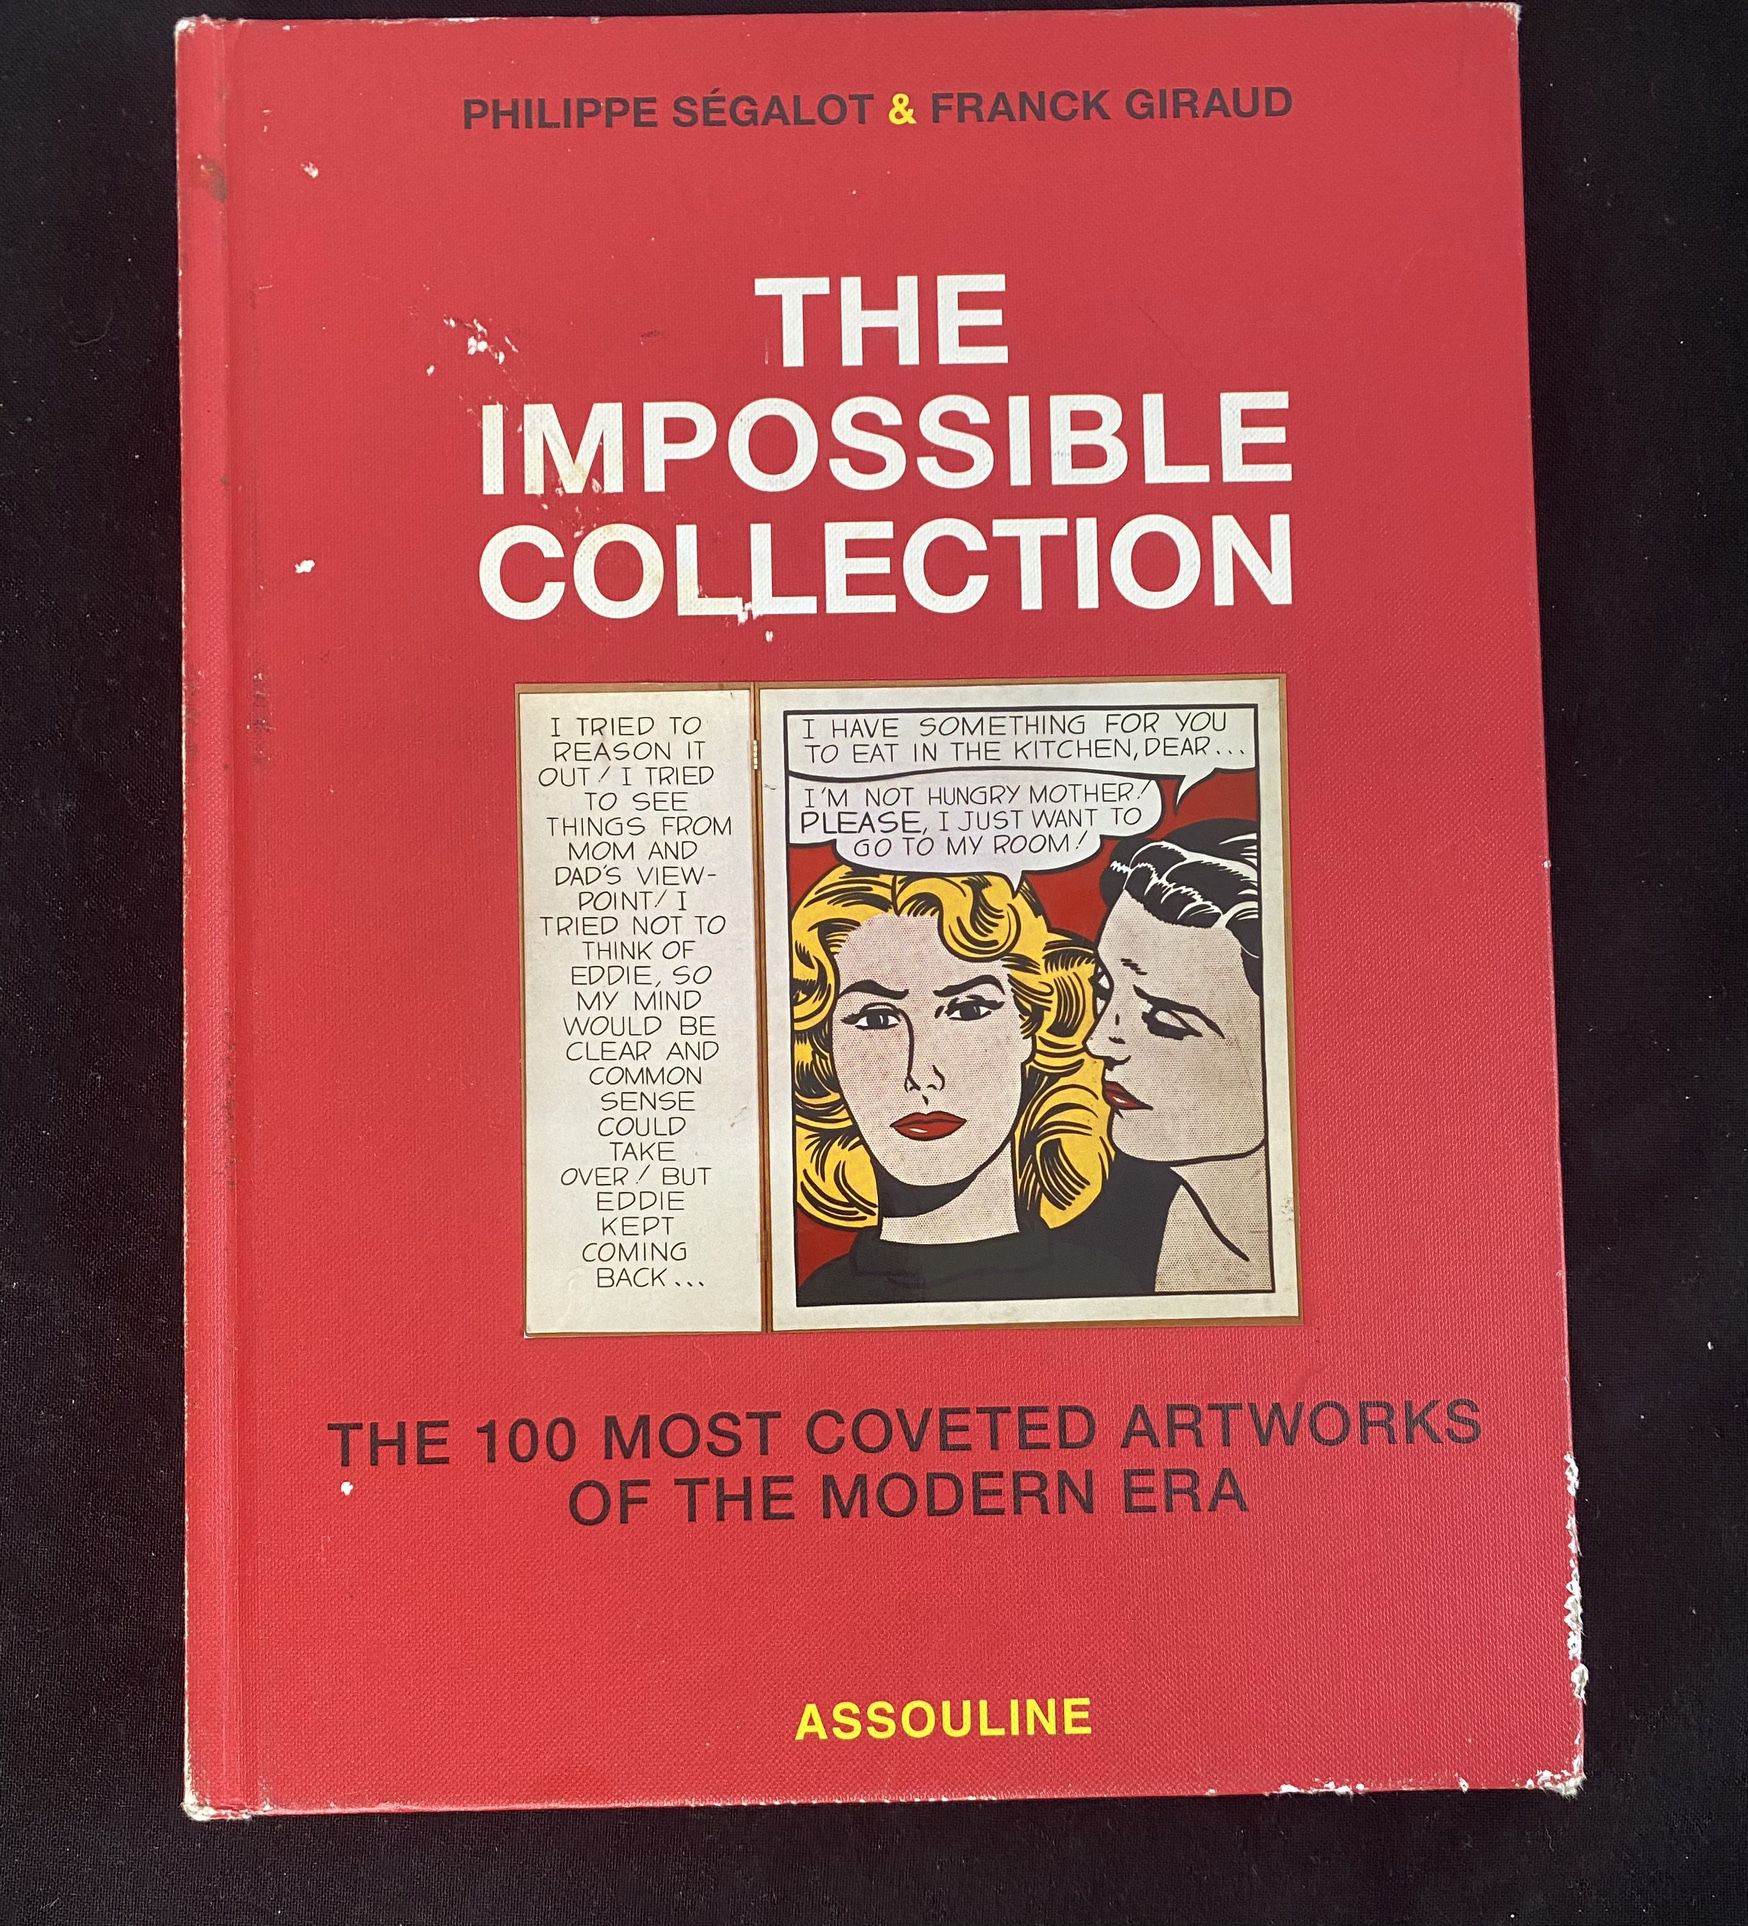 The Impossible Collection Art Book “The 100 Most Coveted ArtWorks Of The Modern Era” By Assouline